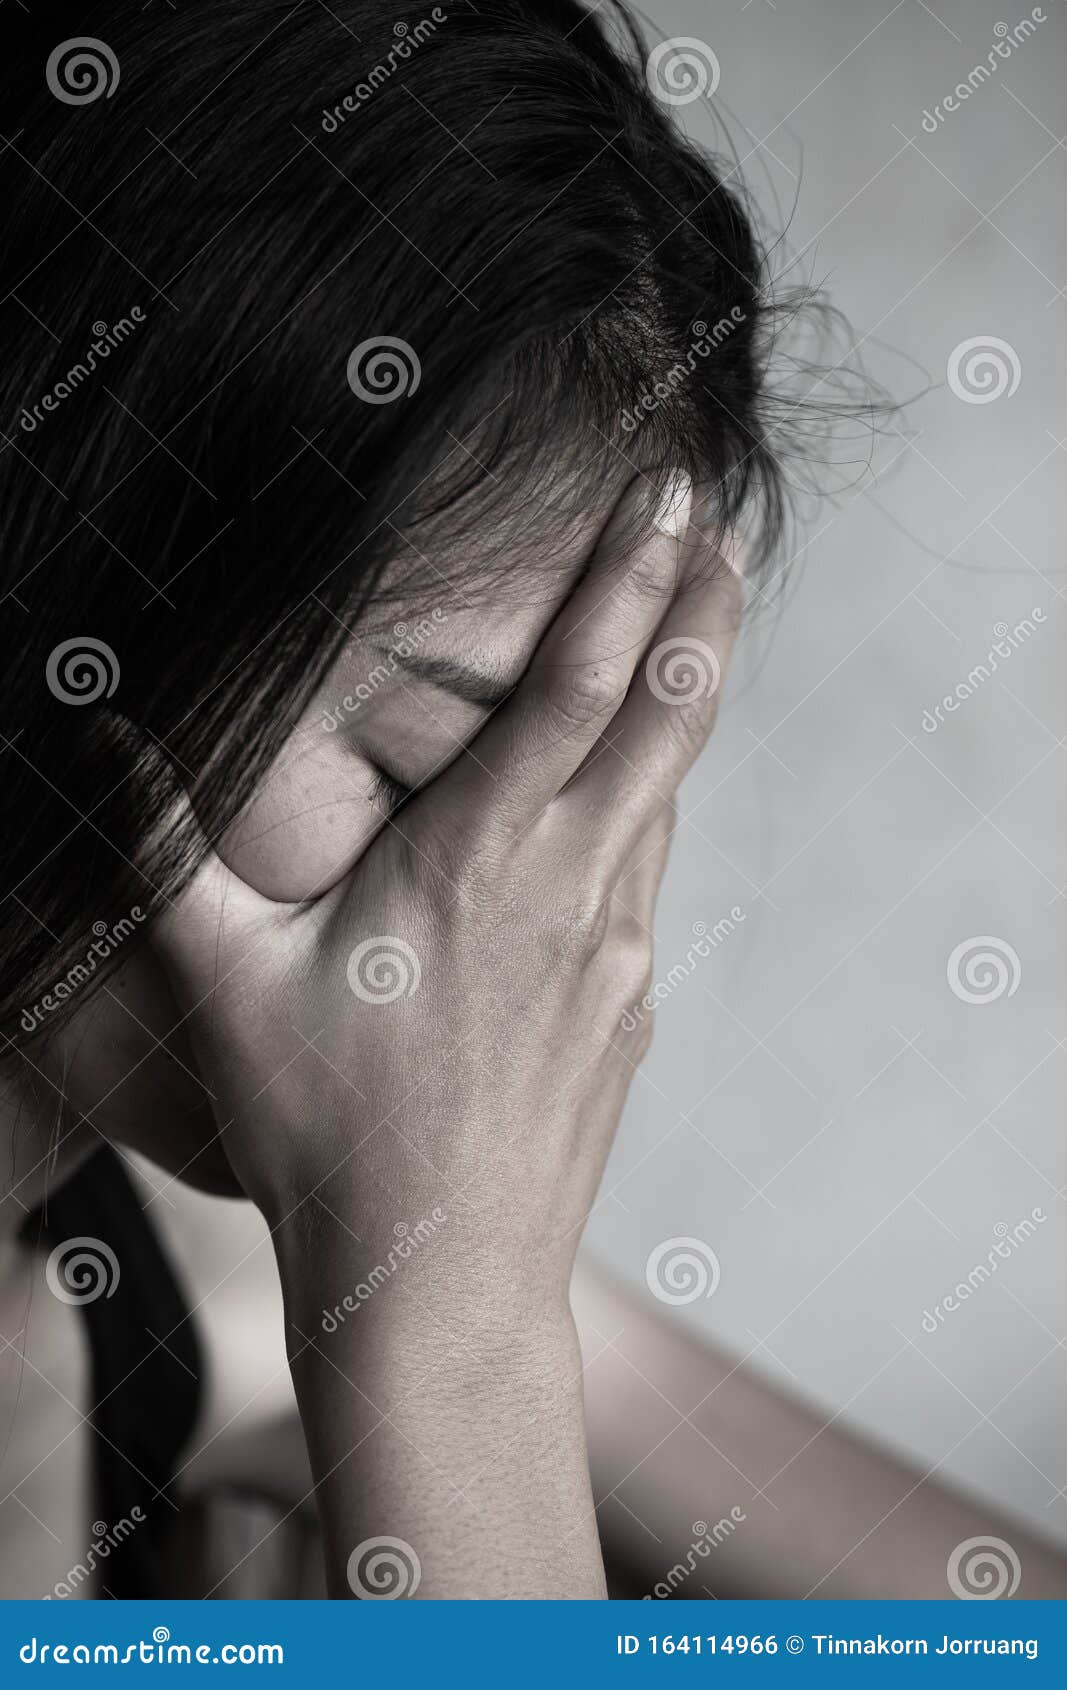 depression or domestic violence concept, desaturated grunge image of a very sad adult woman crying